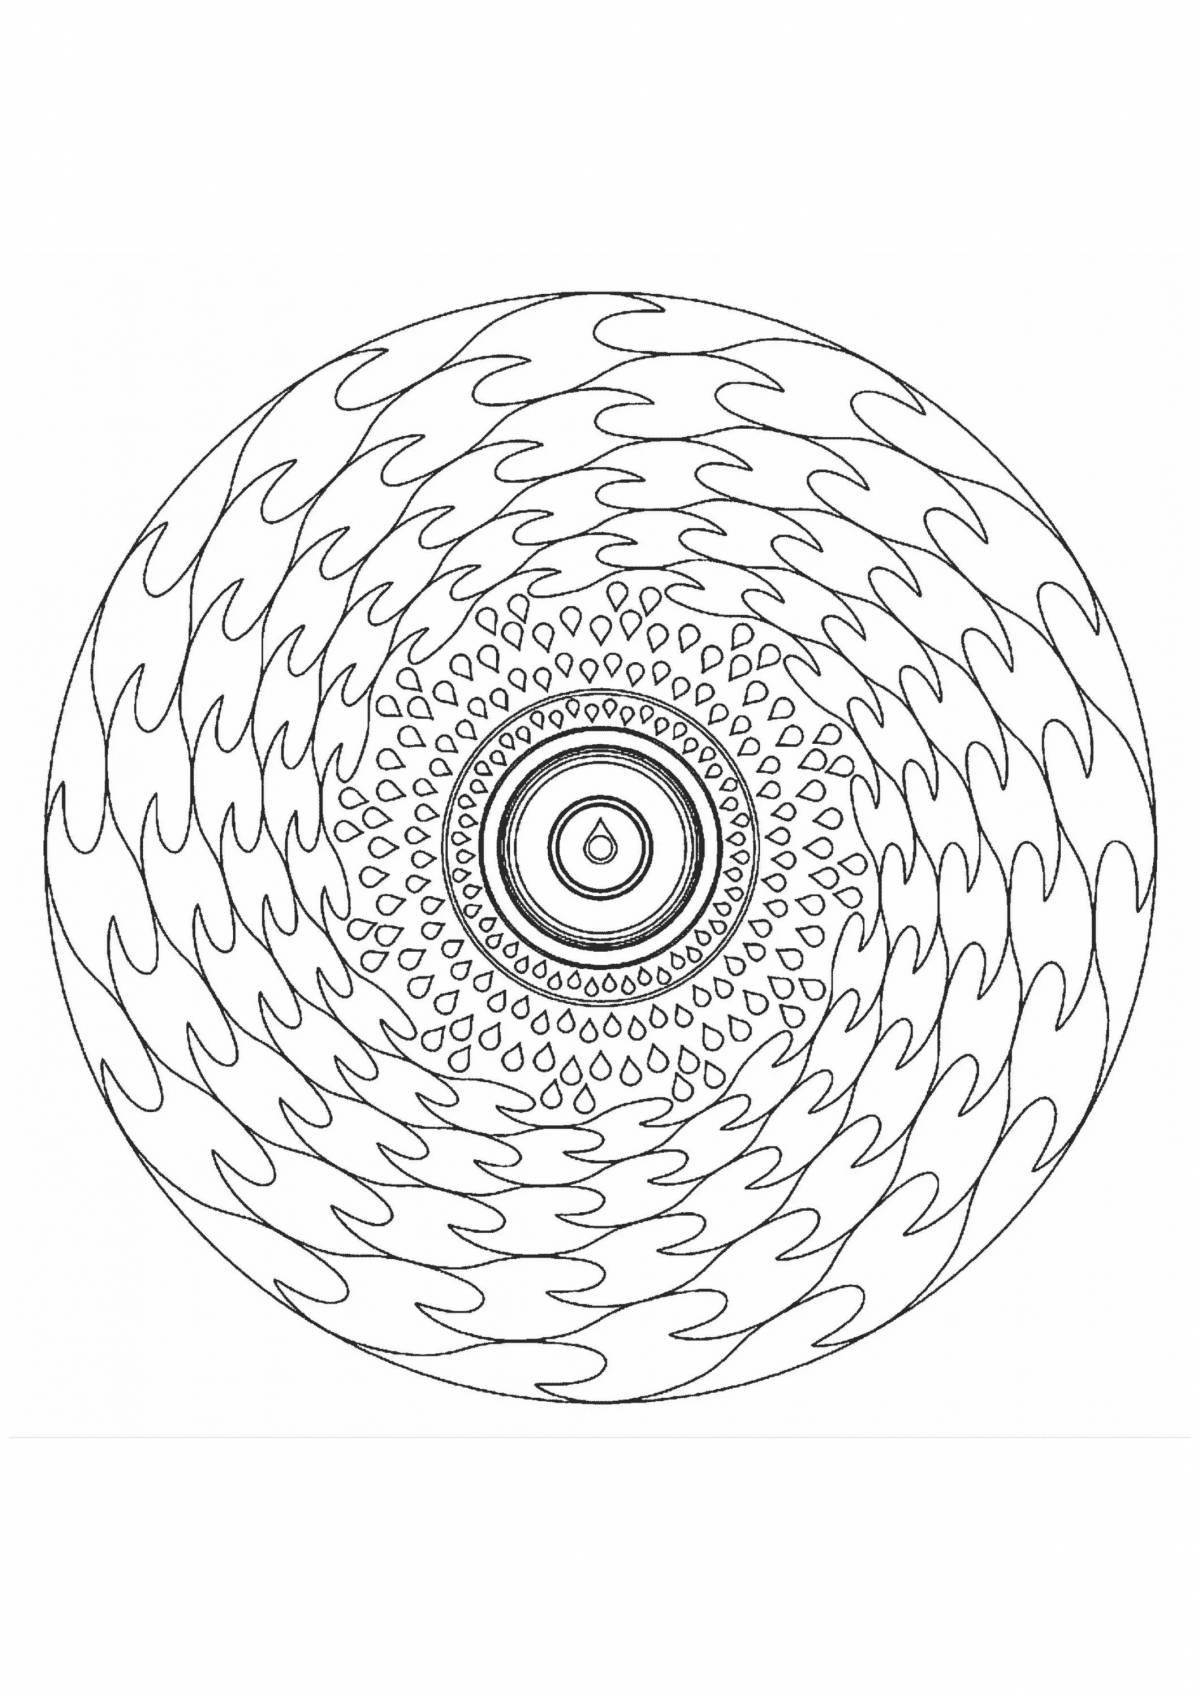 Intriguing round spiral coloring page